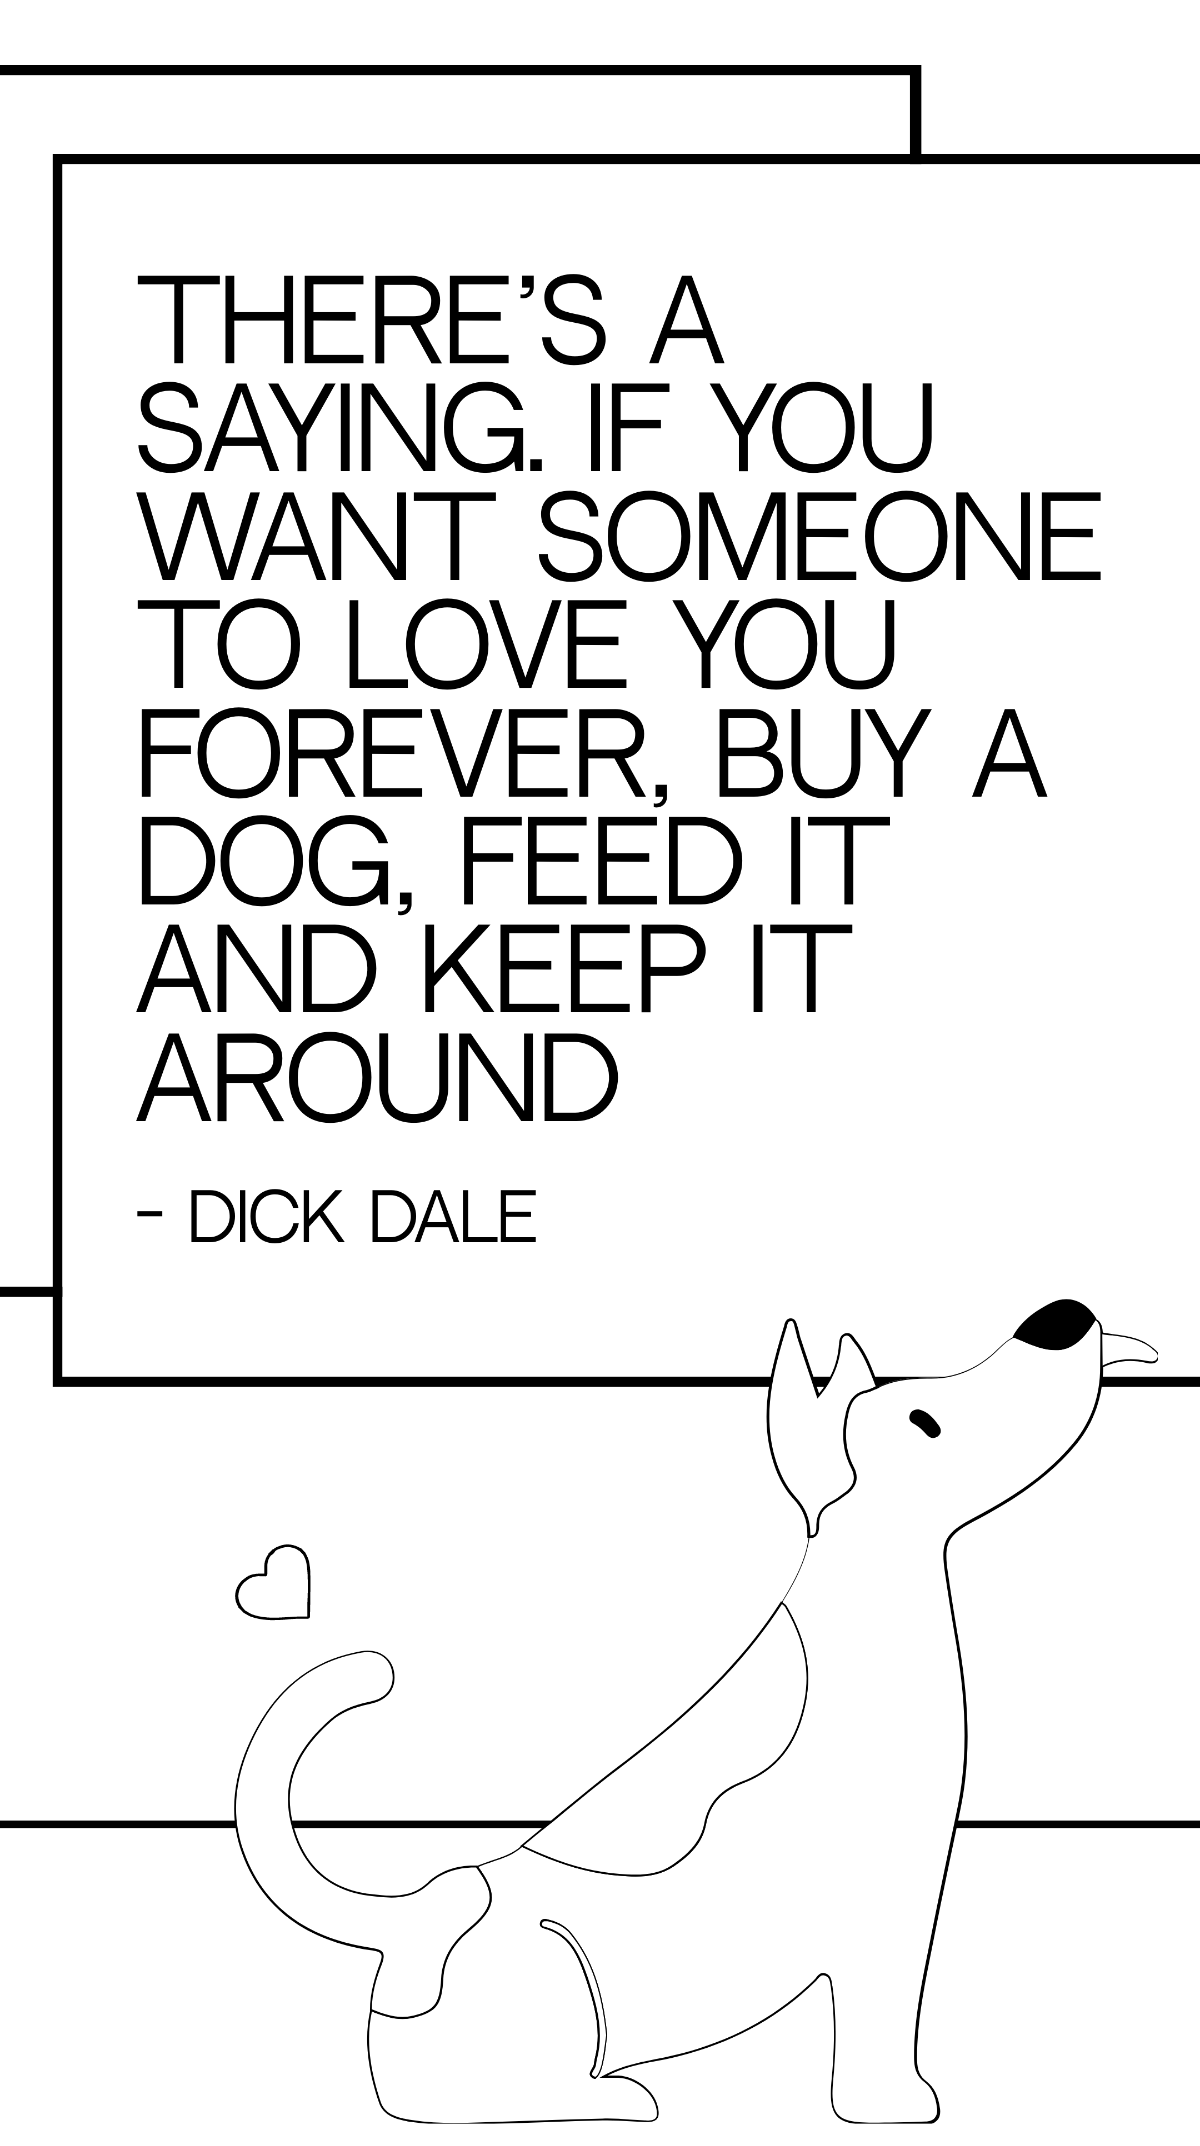 Dick Dale - There's a saying. If you want someone to love you forever, buy a dog, feed it and keep it around Template